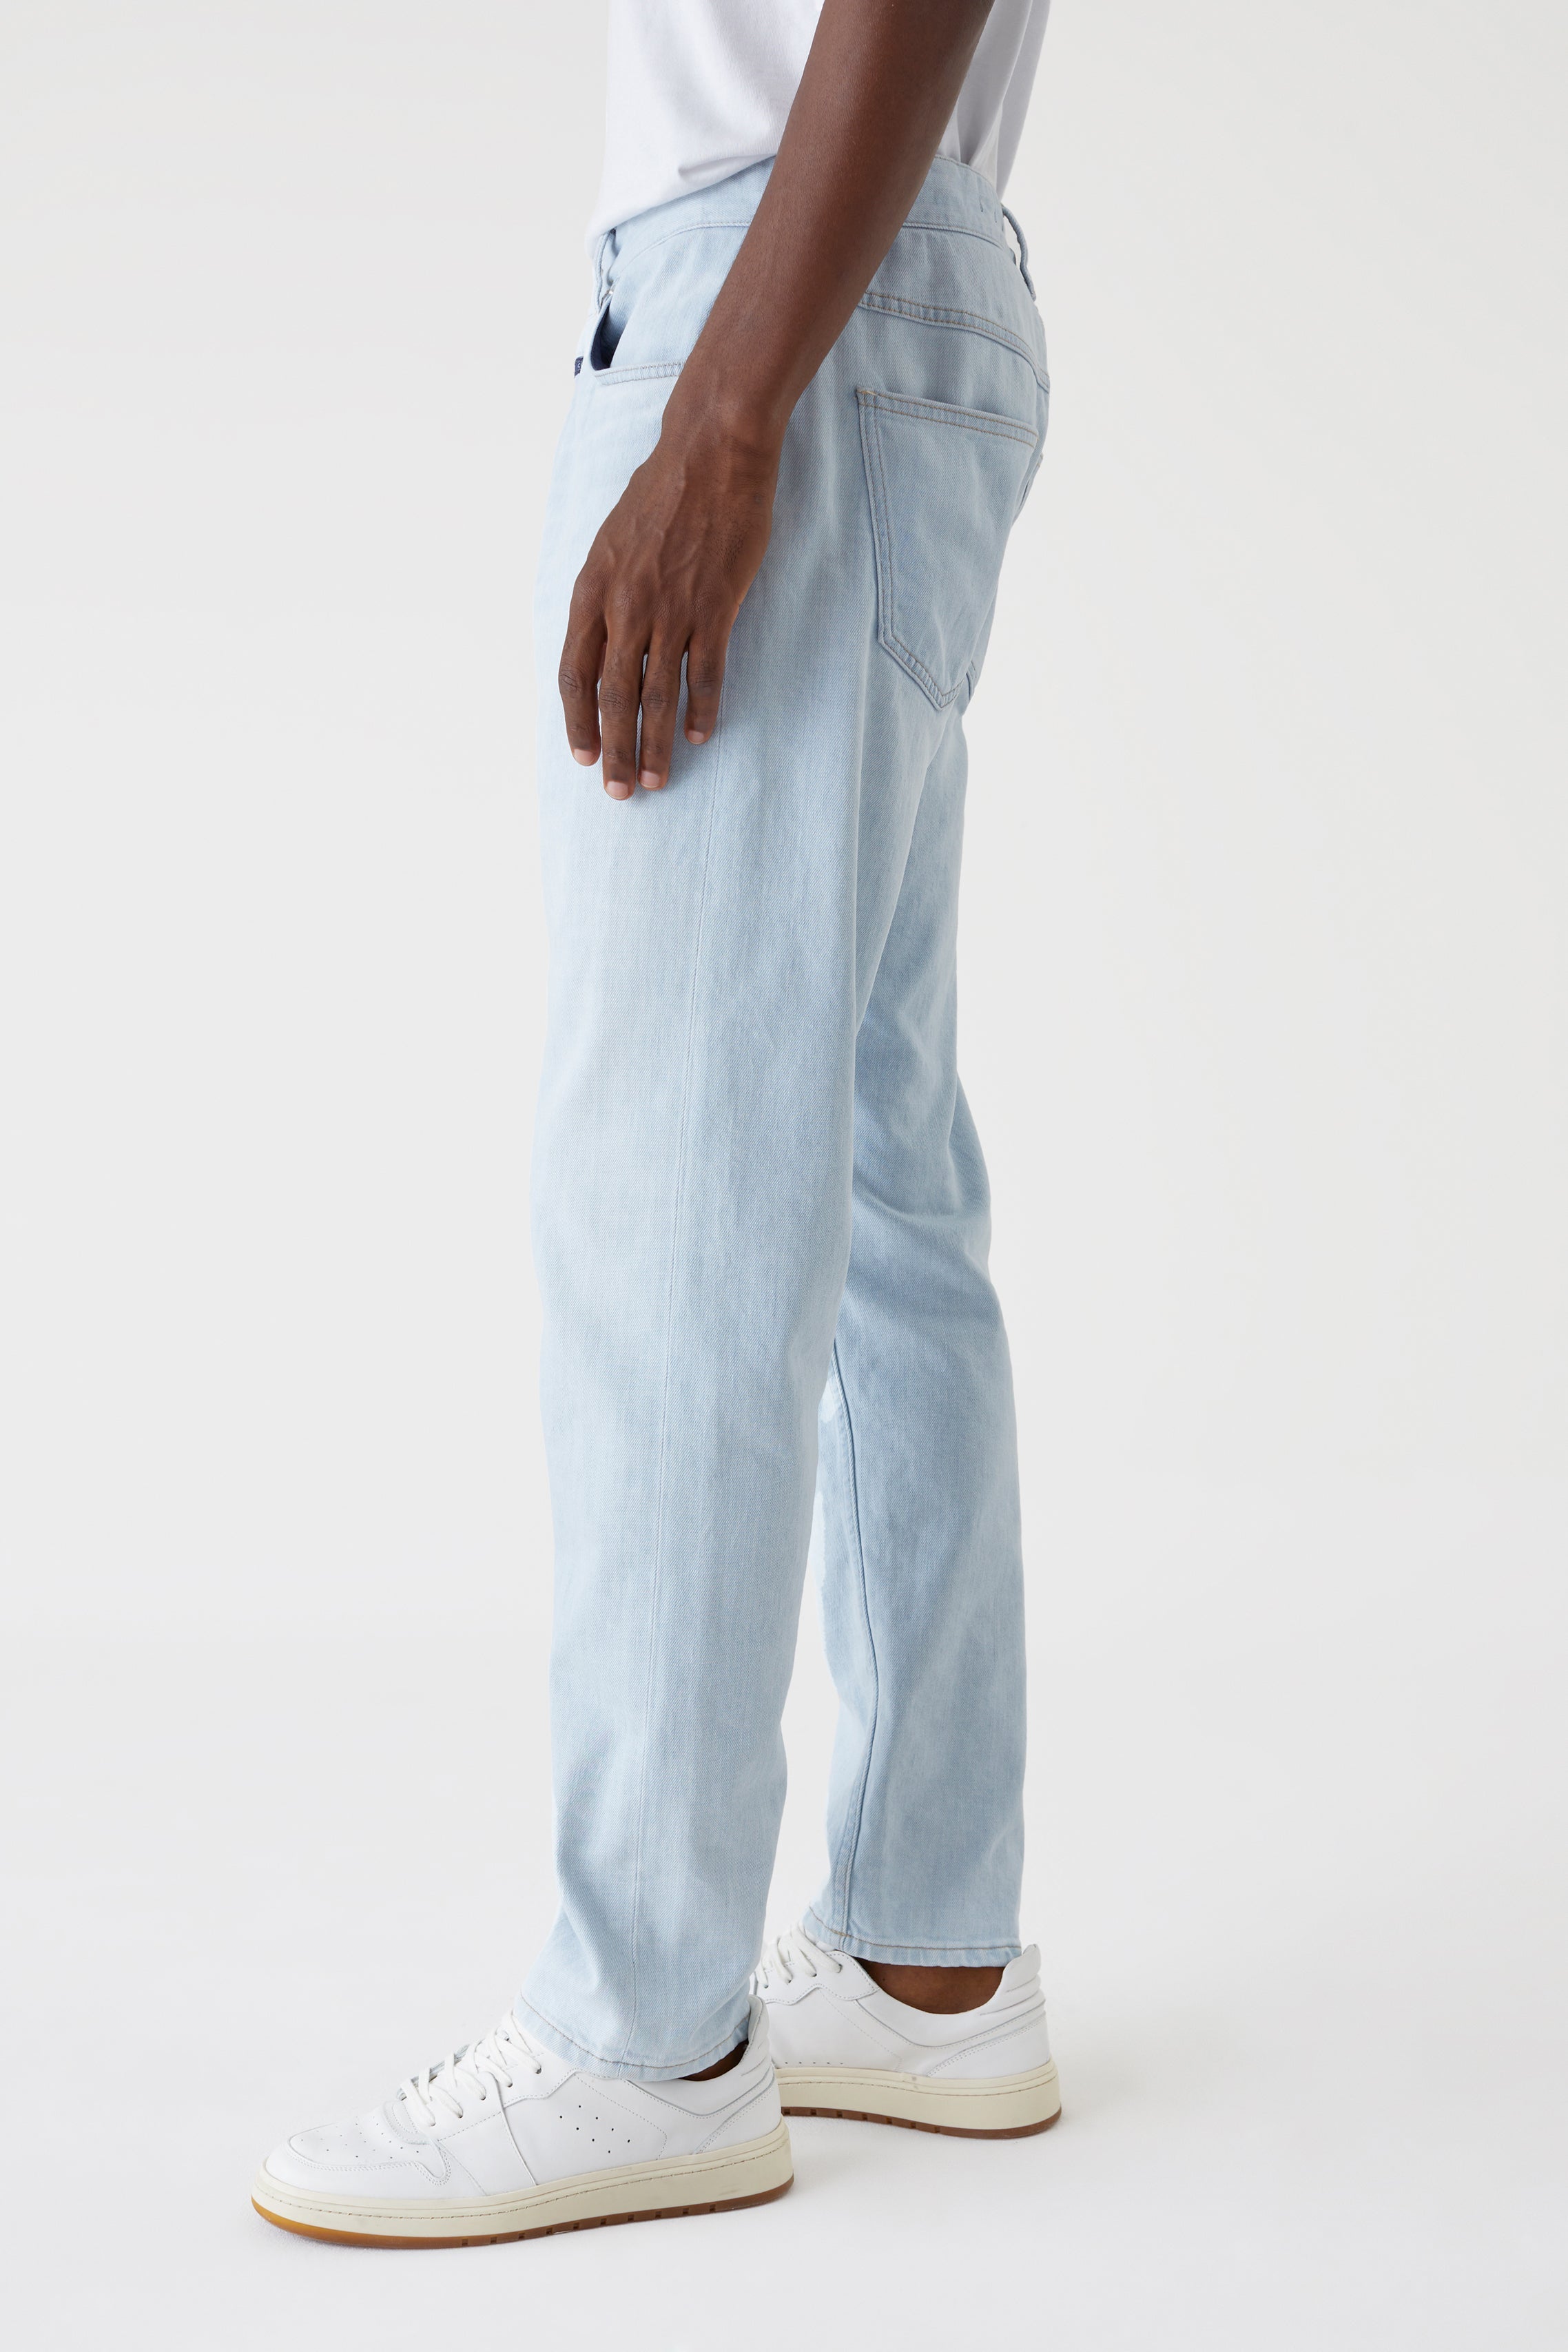 CLOSED-OUTLET-SALE-STYLE-NAME-COOPER-TAPERED-JEANS-Hosen-ARCHIVE-COLLECTION-2_39336f35-4fcb-4891-a190-0f5e28bbe7da.jpg